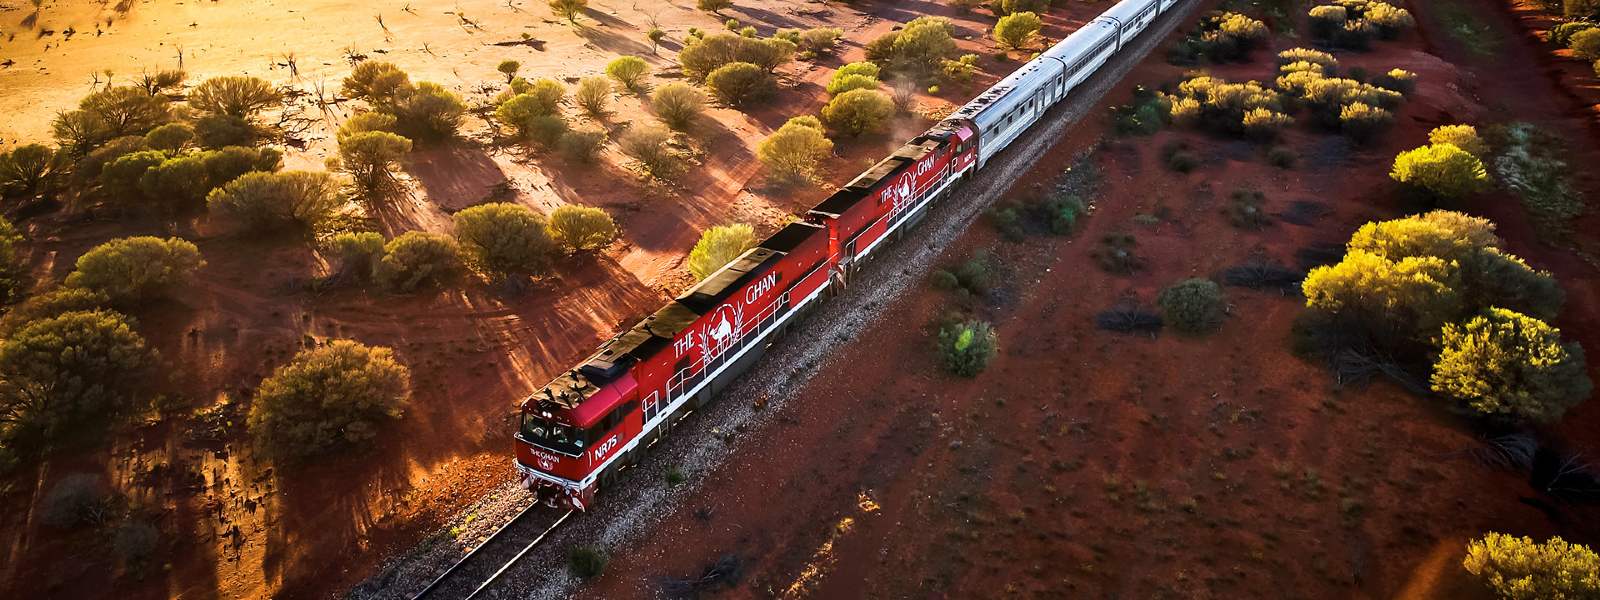 The Ultimate Guide To The Ghan | Racv